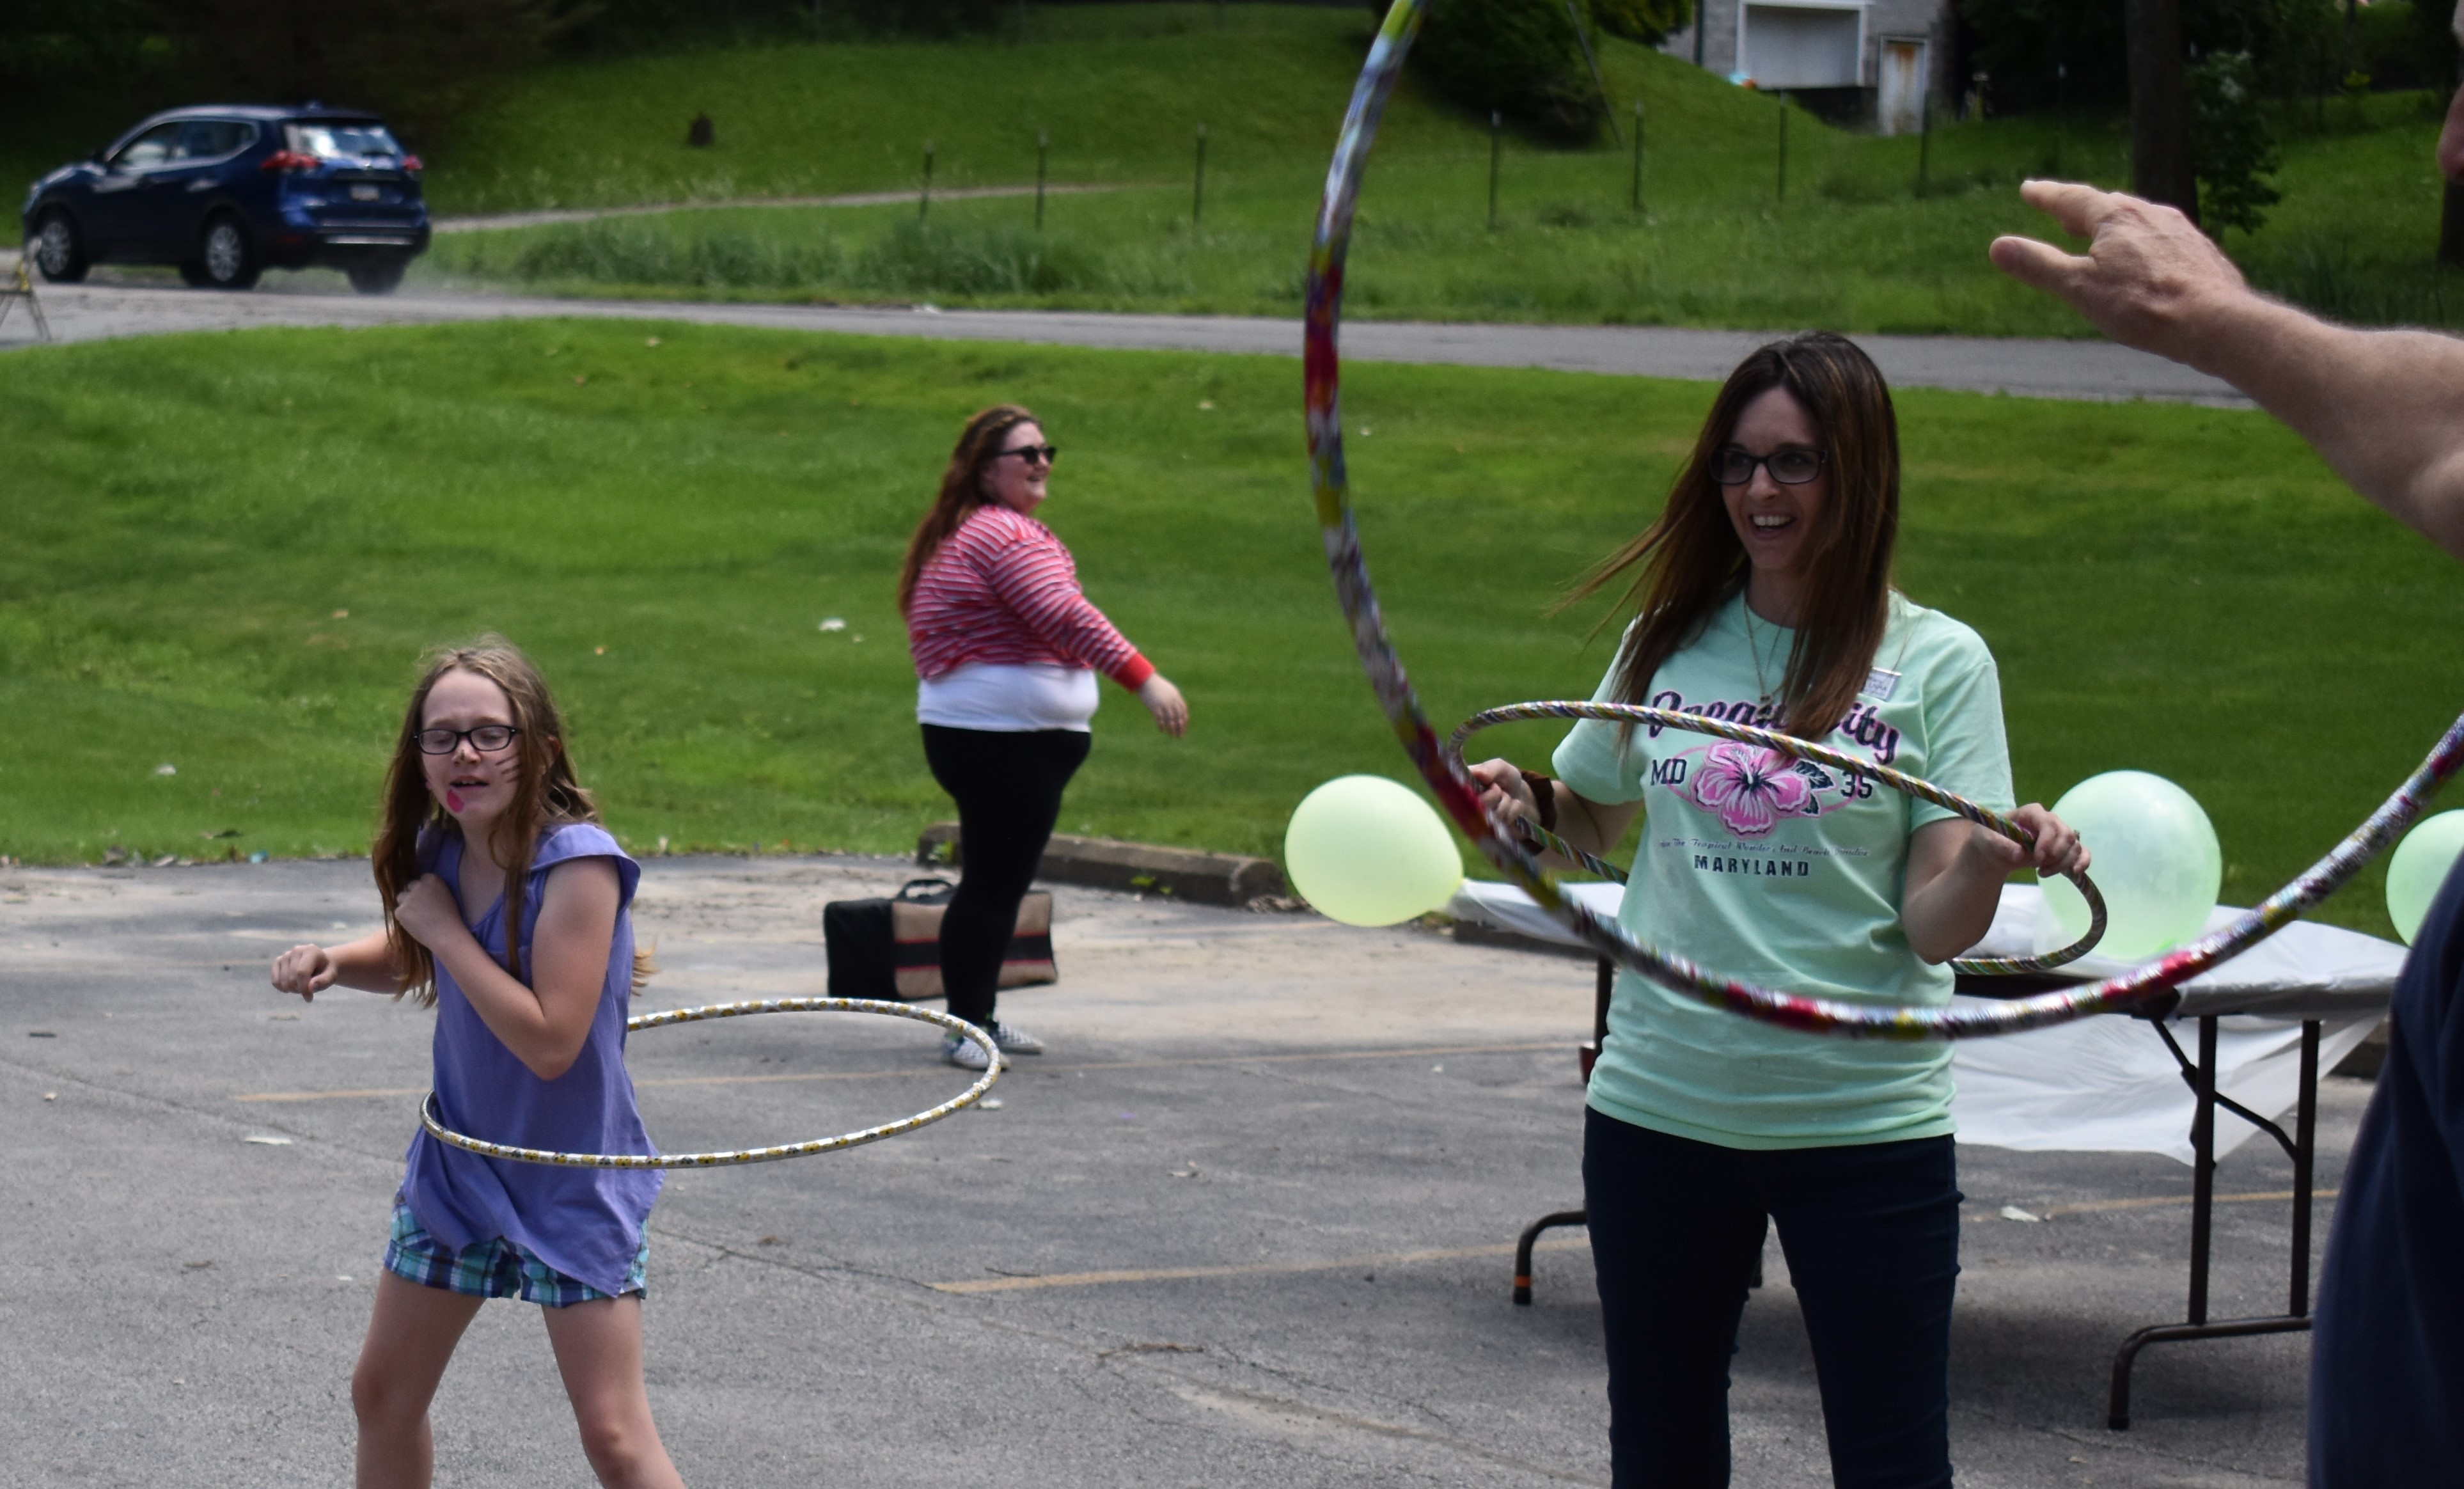 Amber Morrison, 9, gives the hula hoop her all at Addison Summer Fest. Addison Administrator Tiffany Lott is at right.